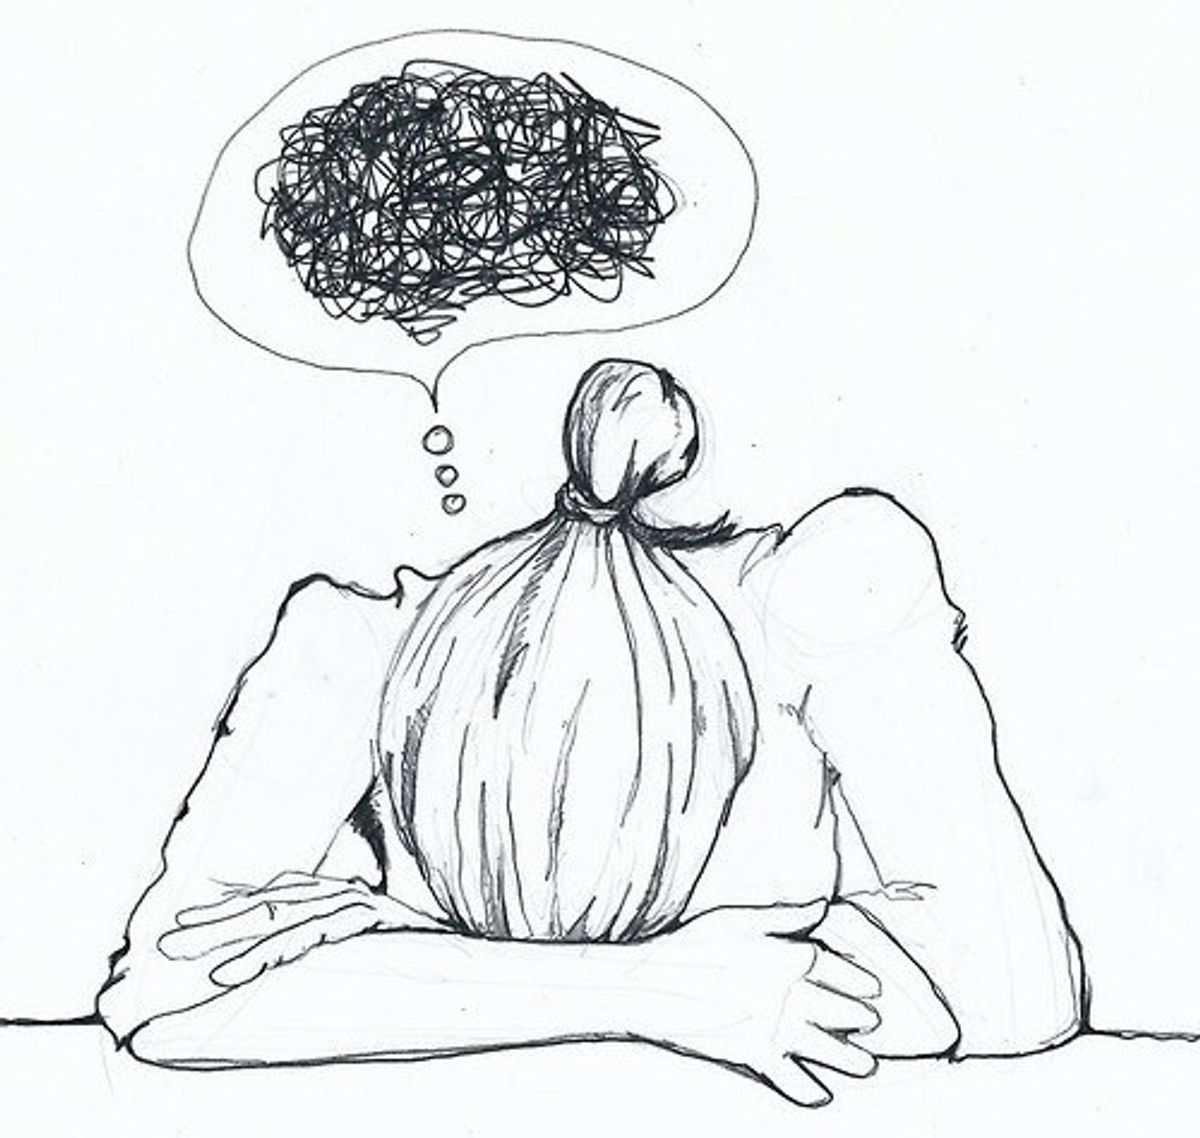 Overthinking And Overanalyzing: What It's Like To Live With Anxiety